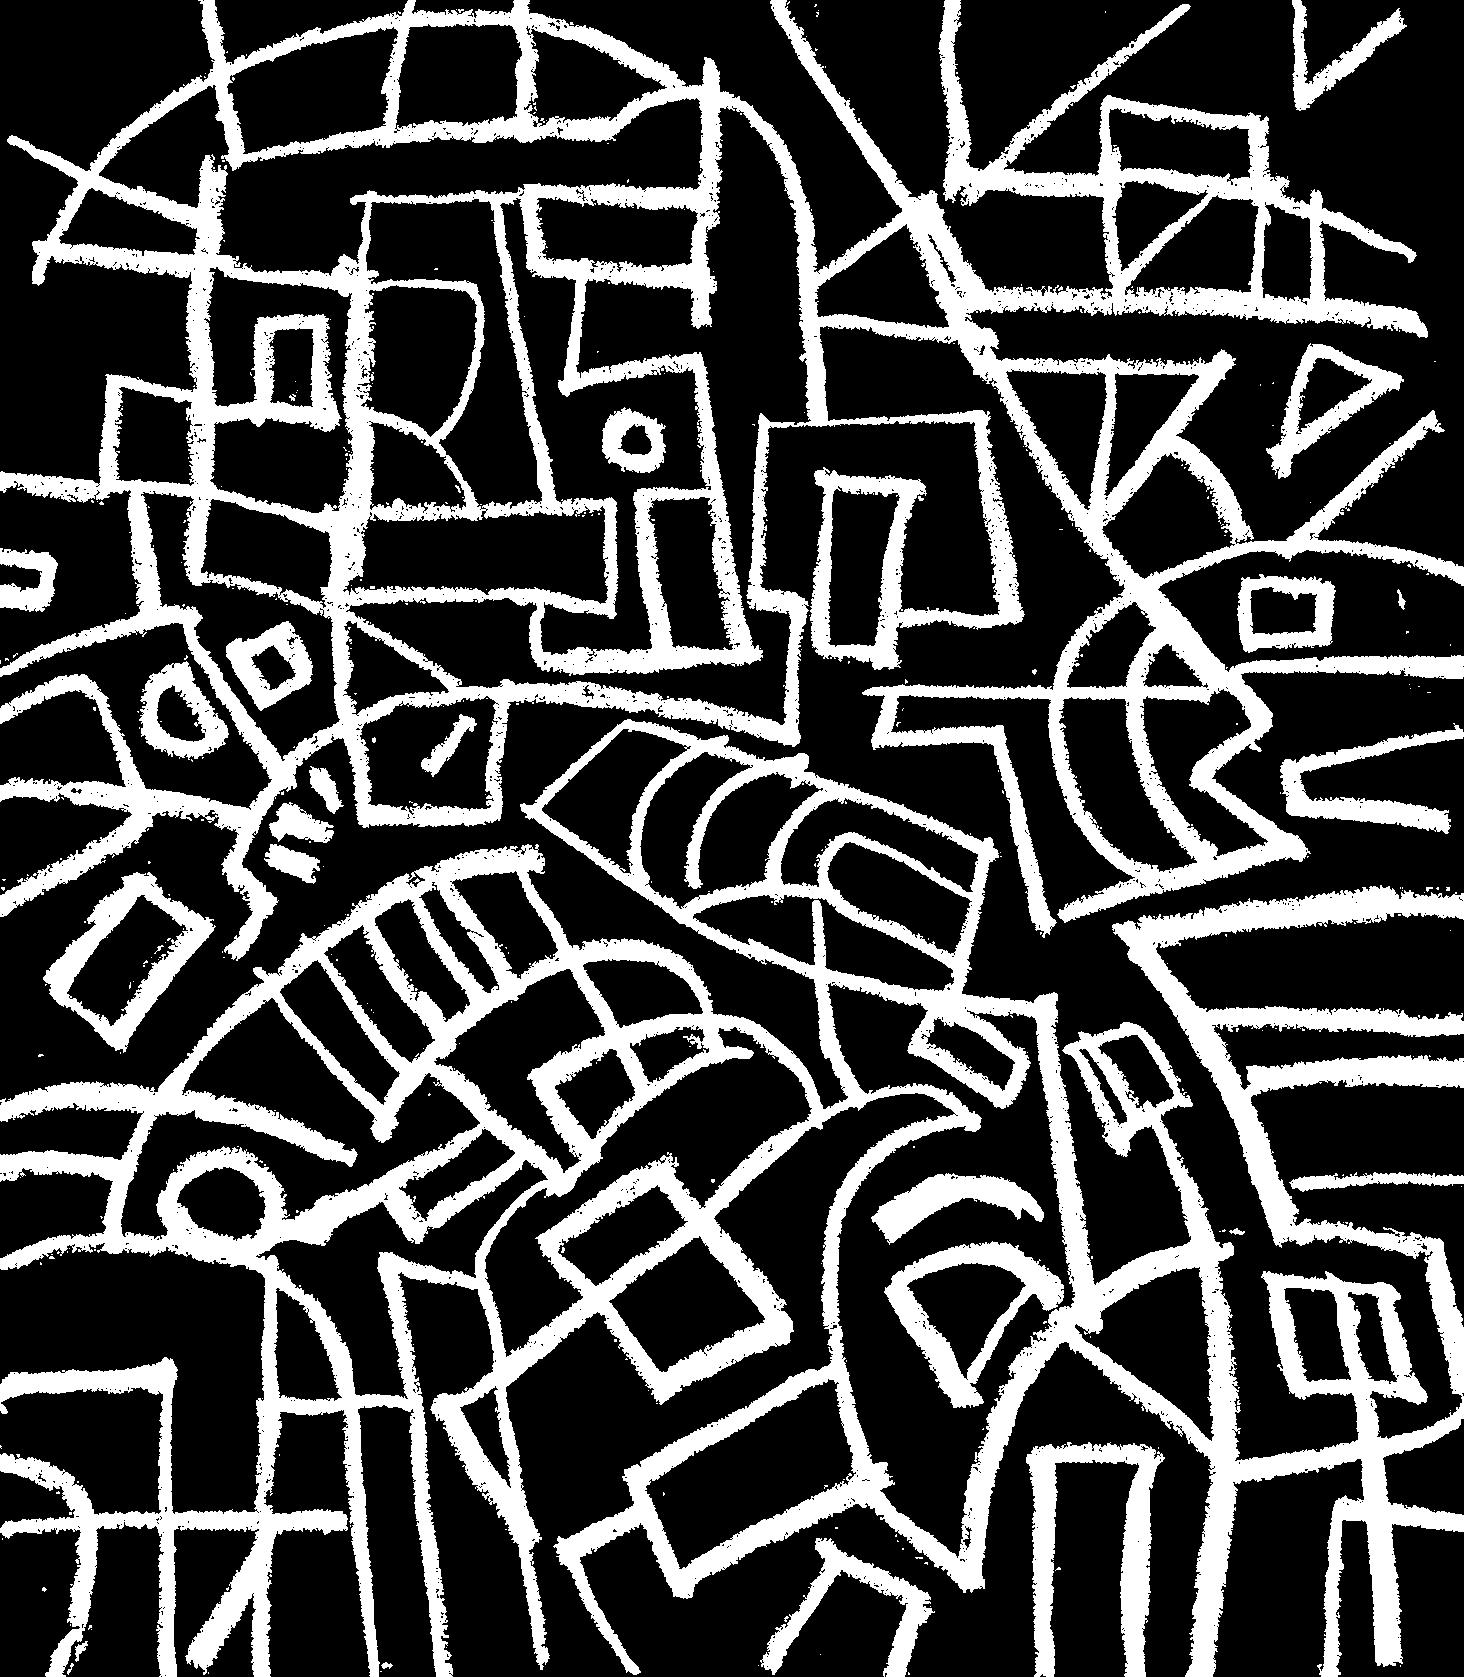 Robert Petrick Abstract Painting - Mass Hysteria, Chalkboard Series, Abstract Geometric Line Painting